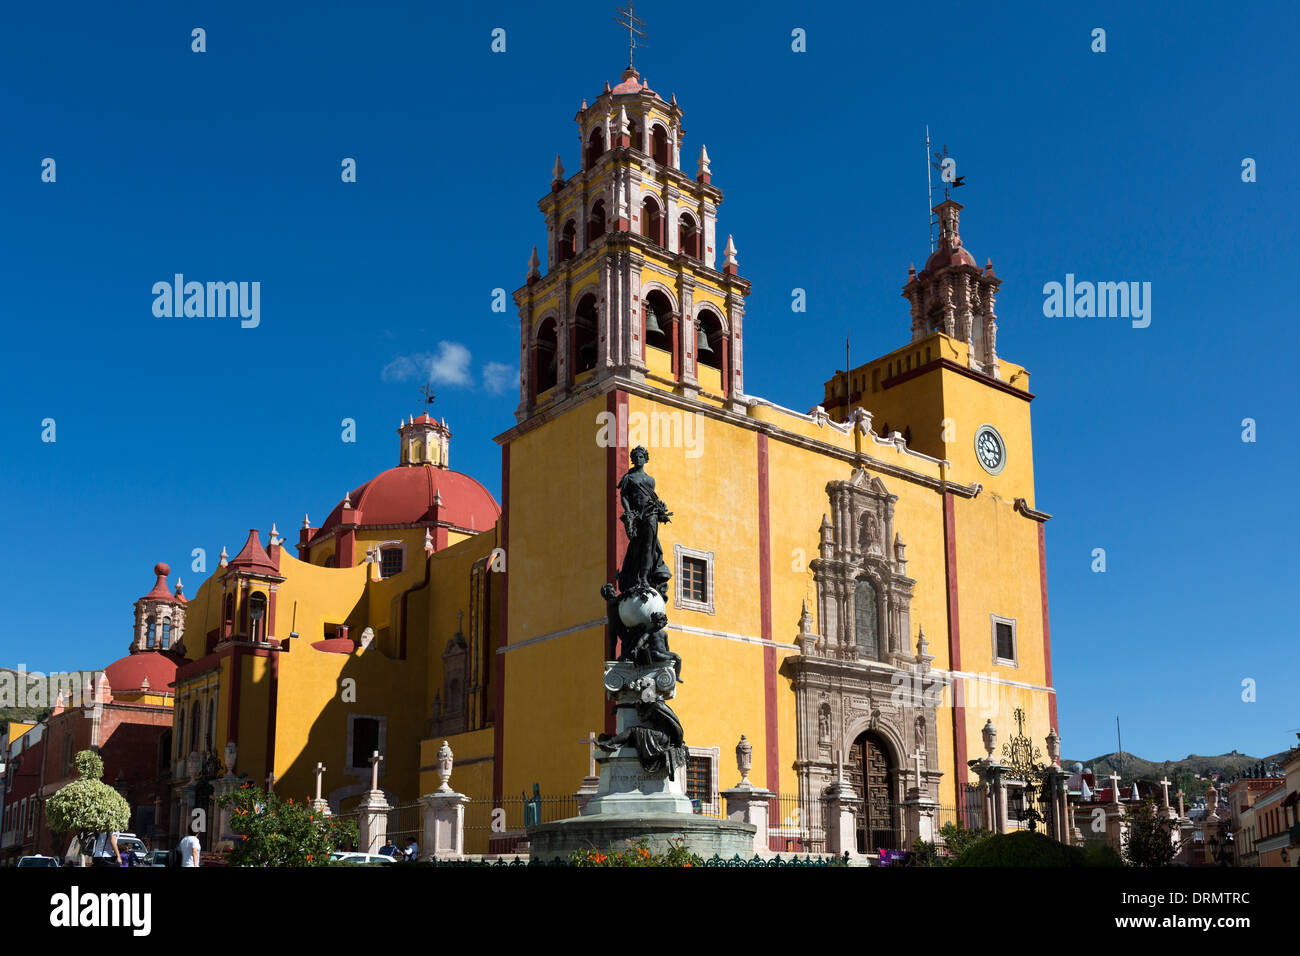 Basilica of Our Lady of Guanajuato. Built between 1671 and 1696, its facade is Baroque mannerist style. Stock Photo